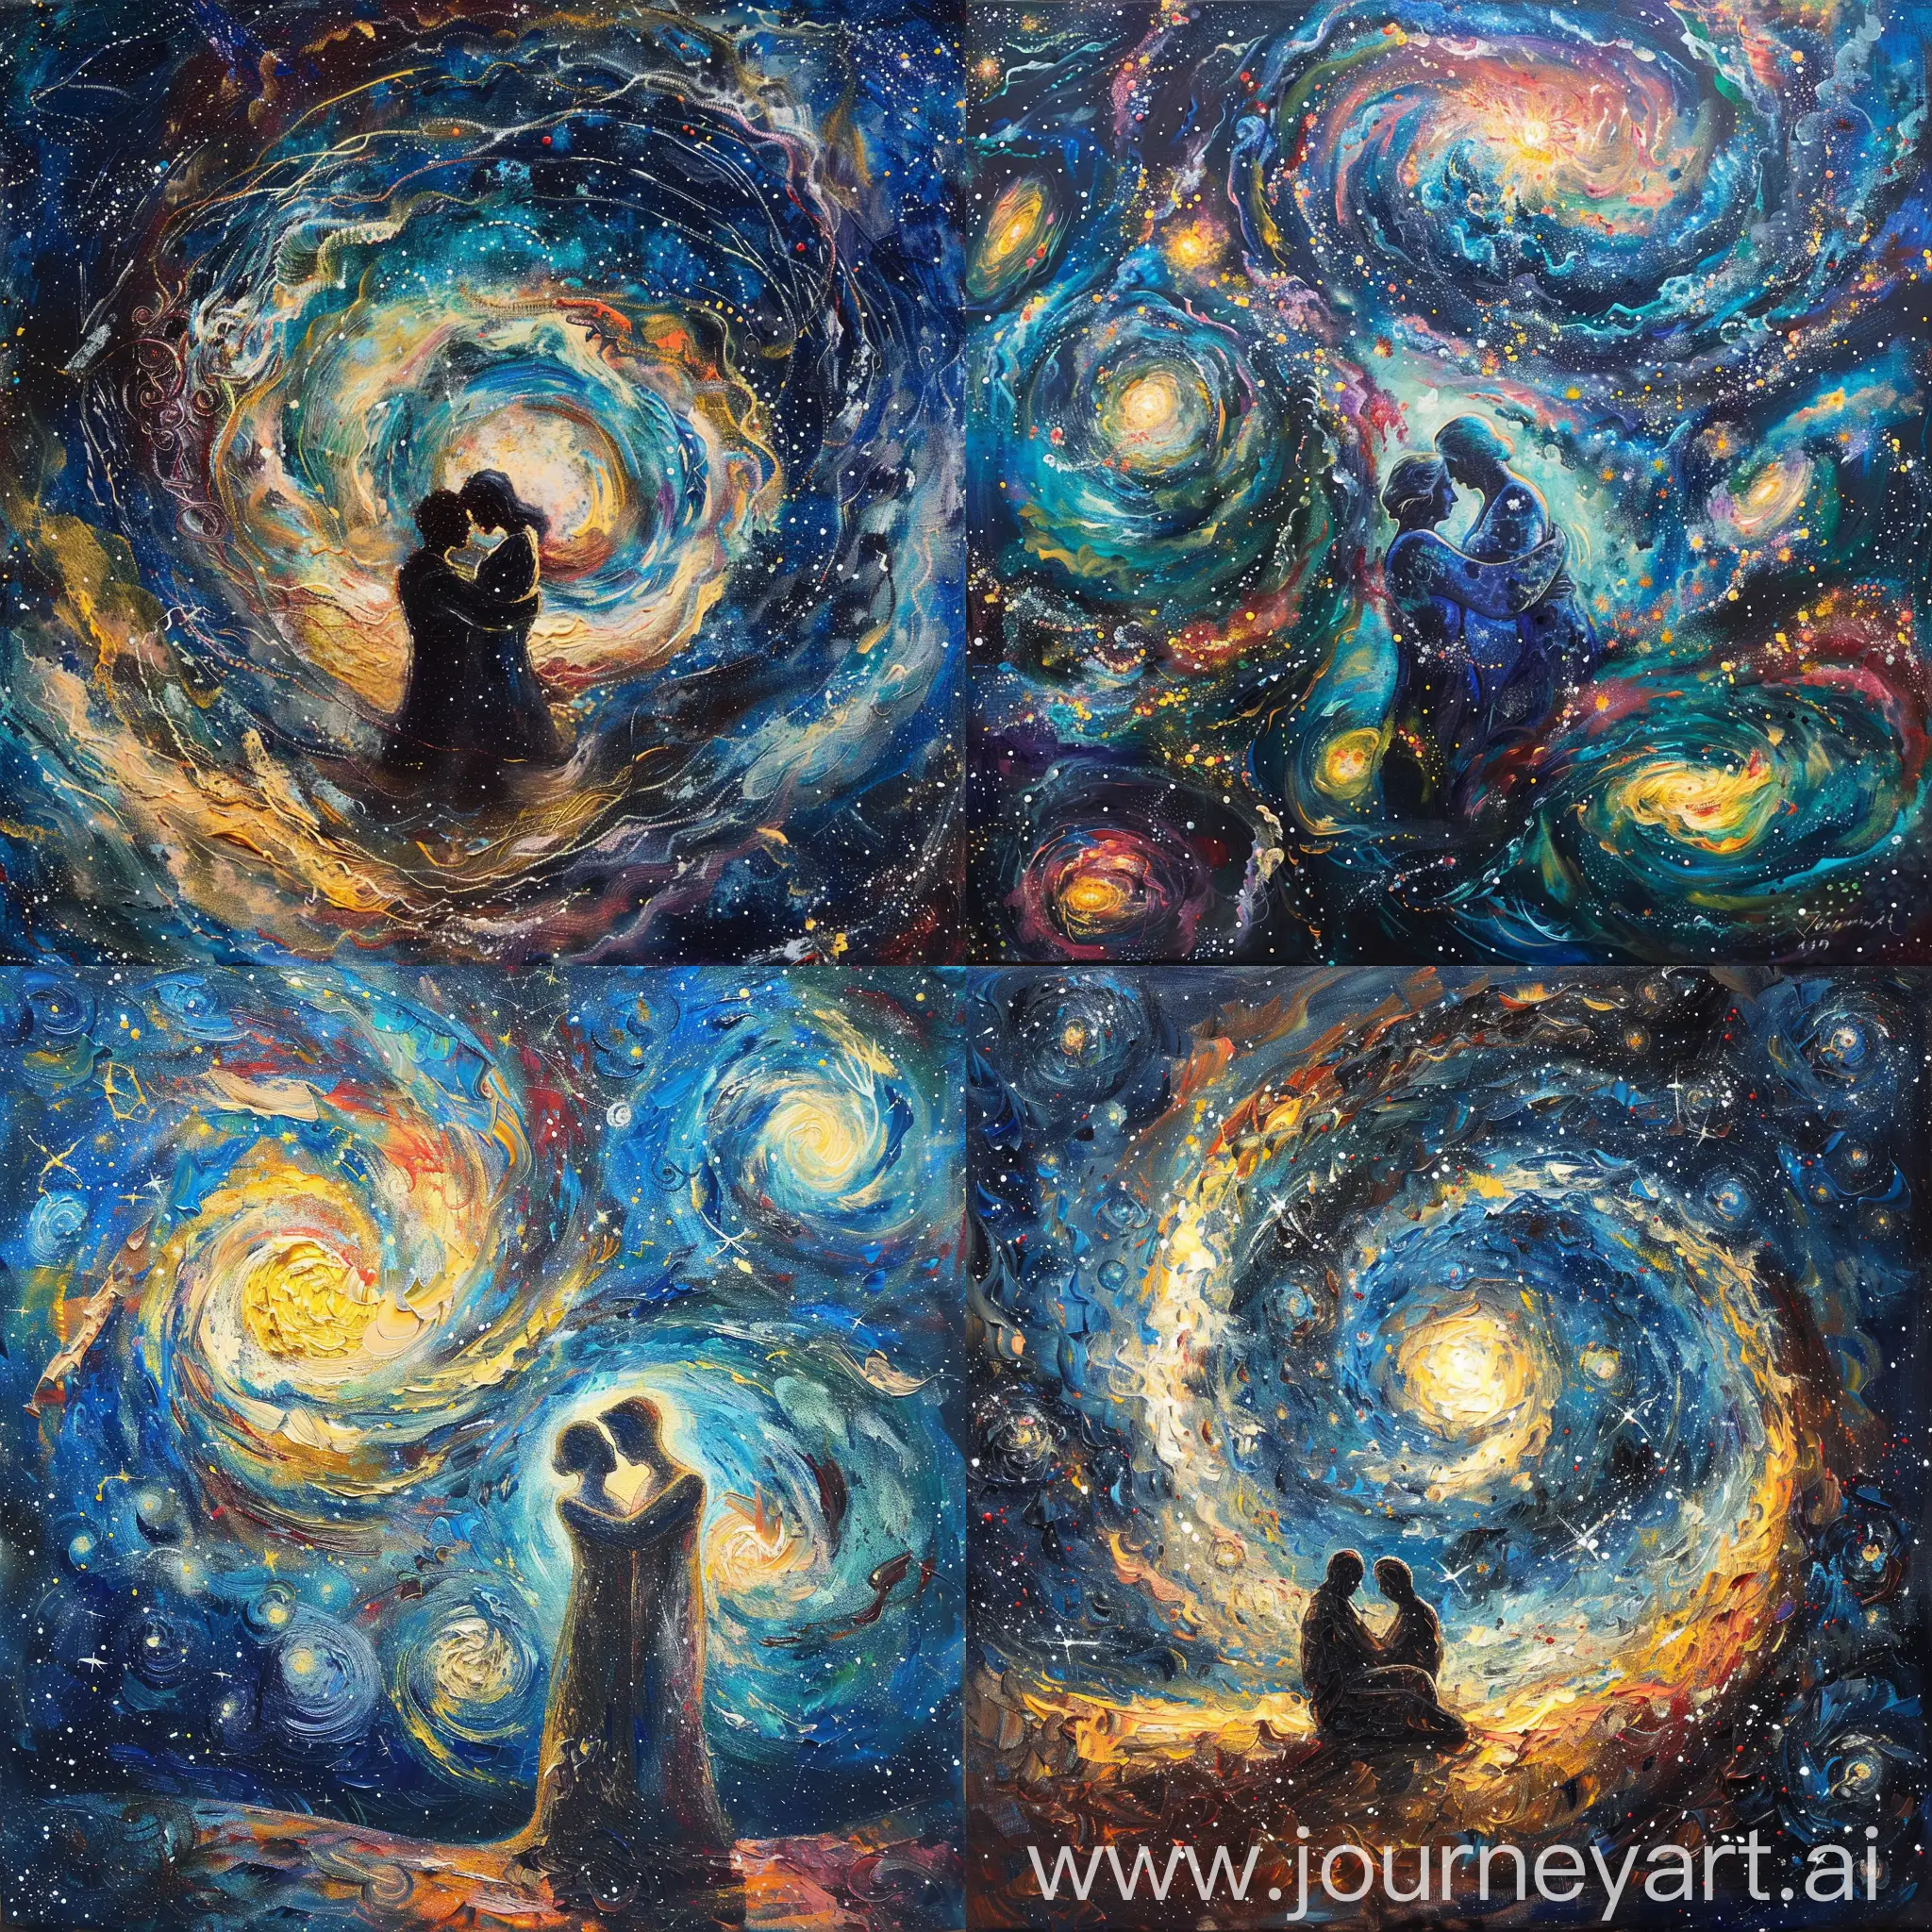 Eternal Embrace: Create a painting depicting two figures locked in a timeless embrace, surrounded by swirling galaxies and constellations.